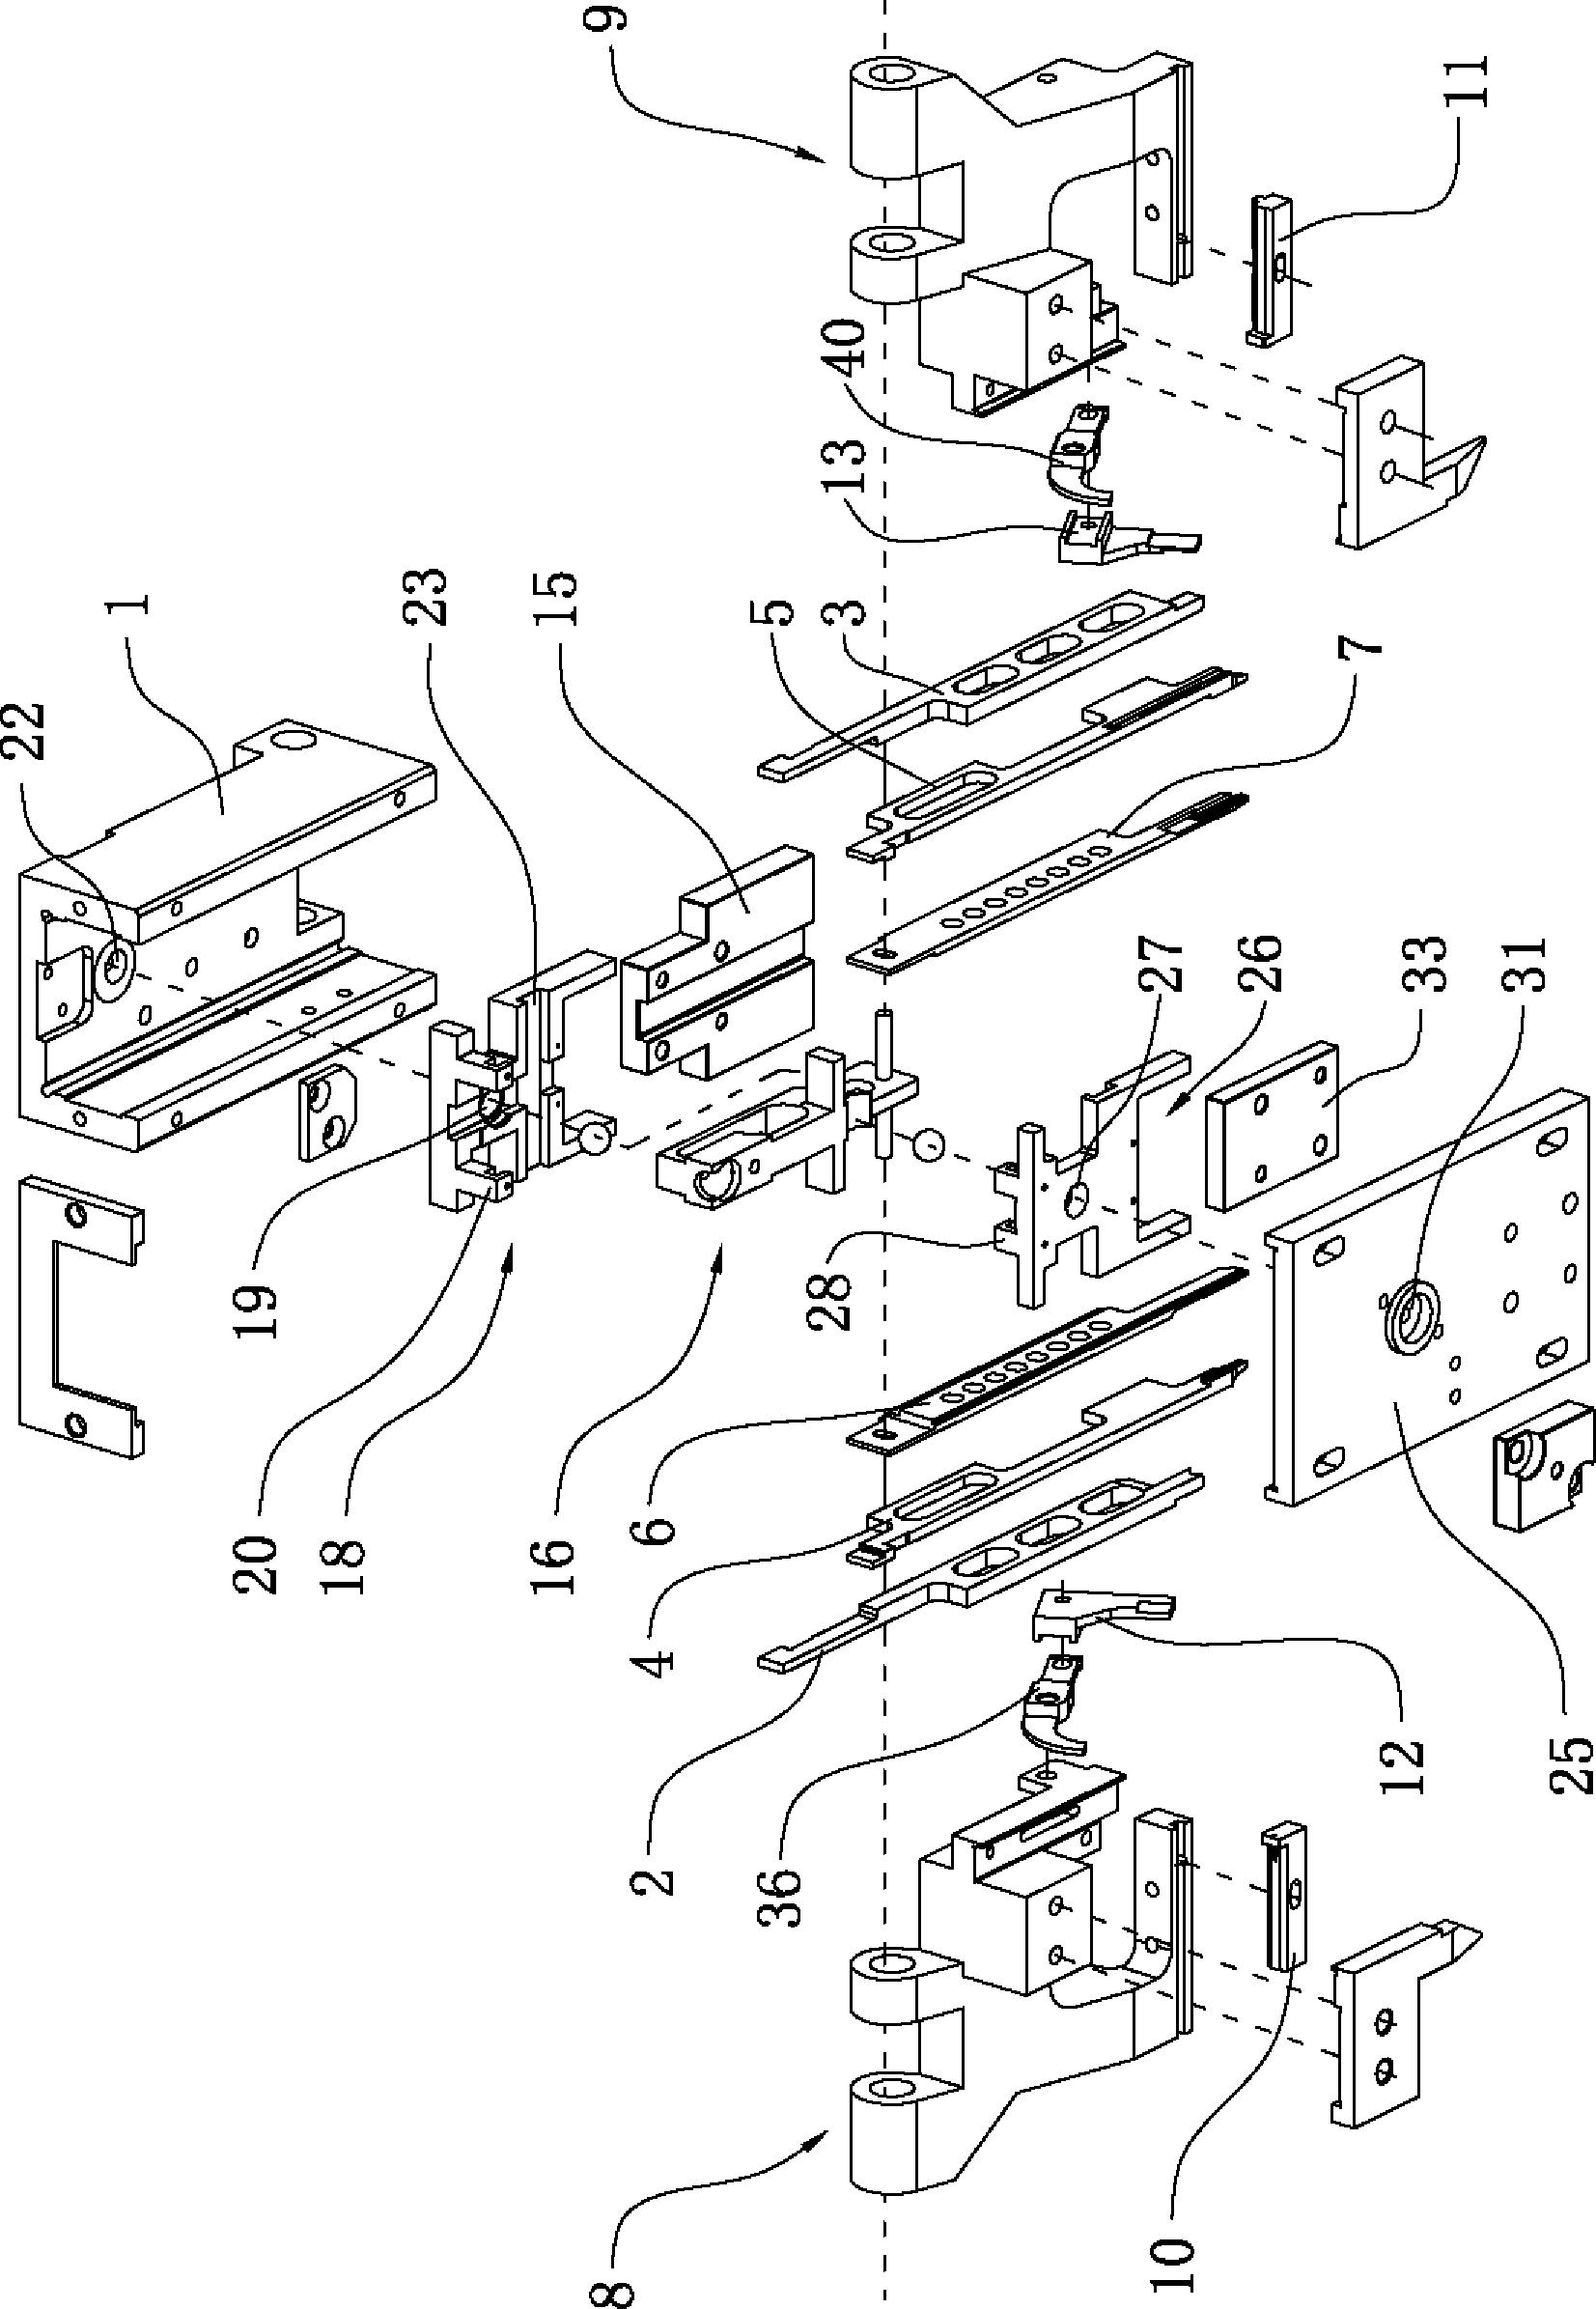 Component shaping and inserting mechanism for component inserting machine